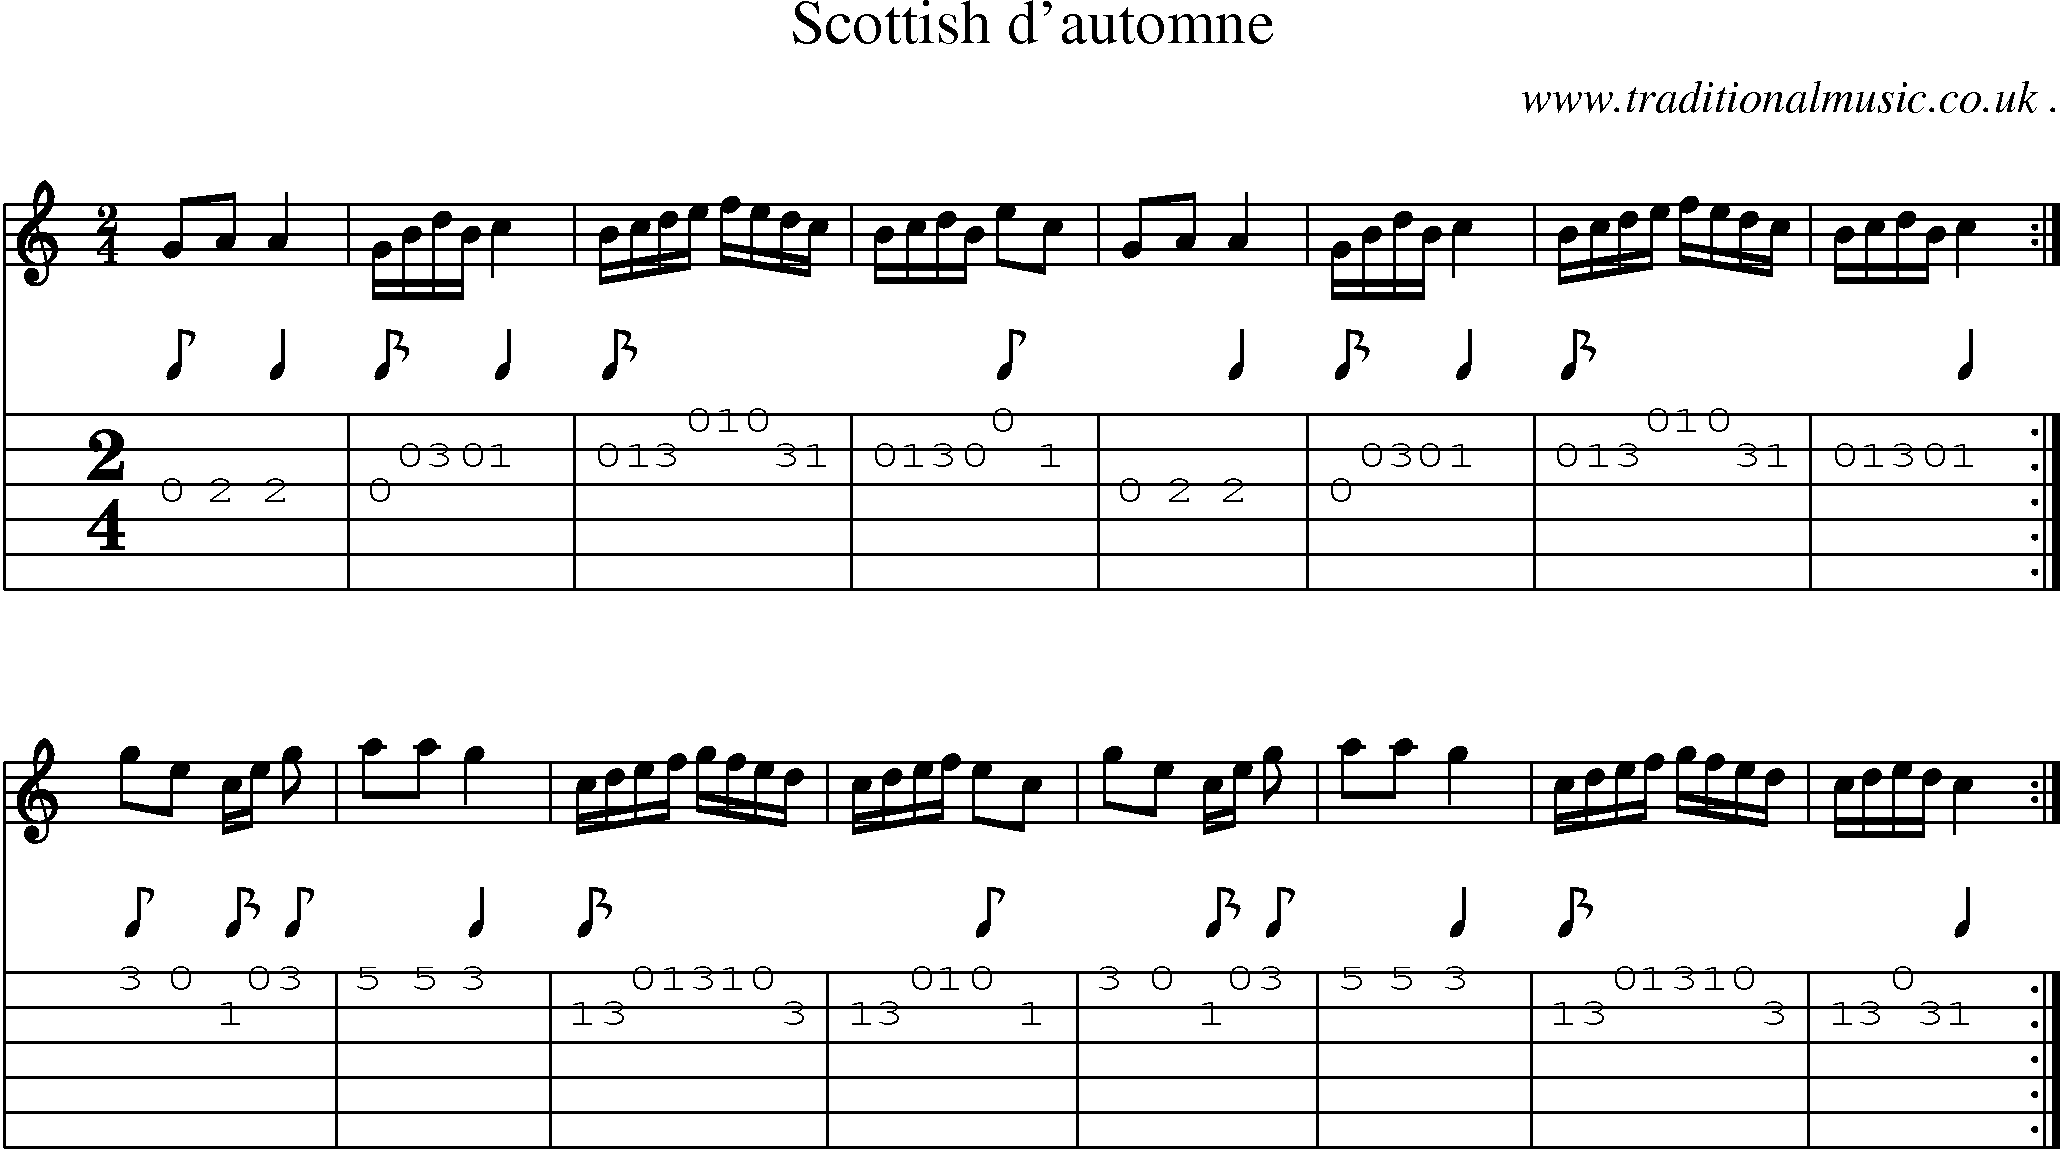 Sheet-Music and Guitar Tabs for Scottish Dautomne